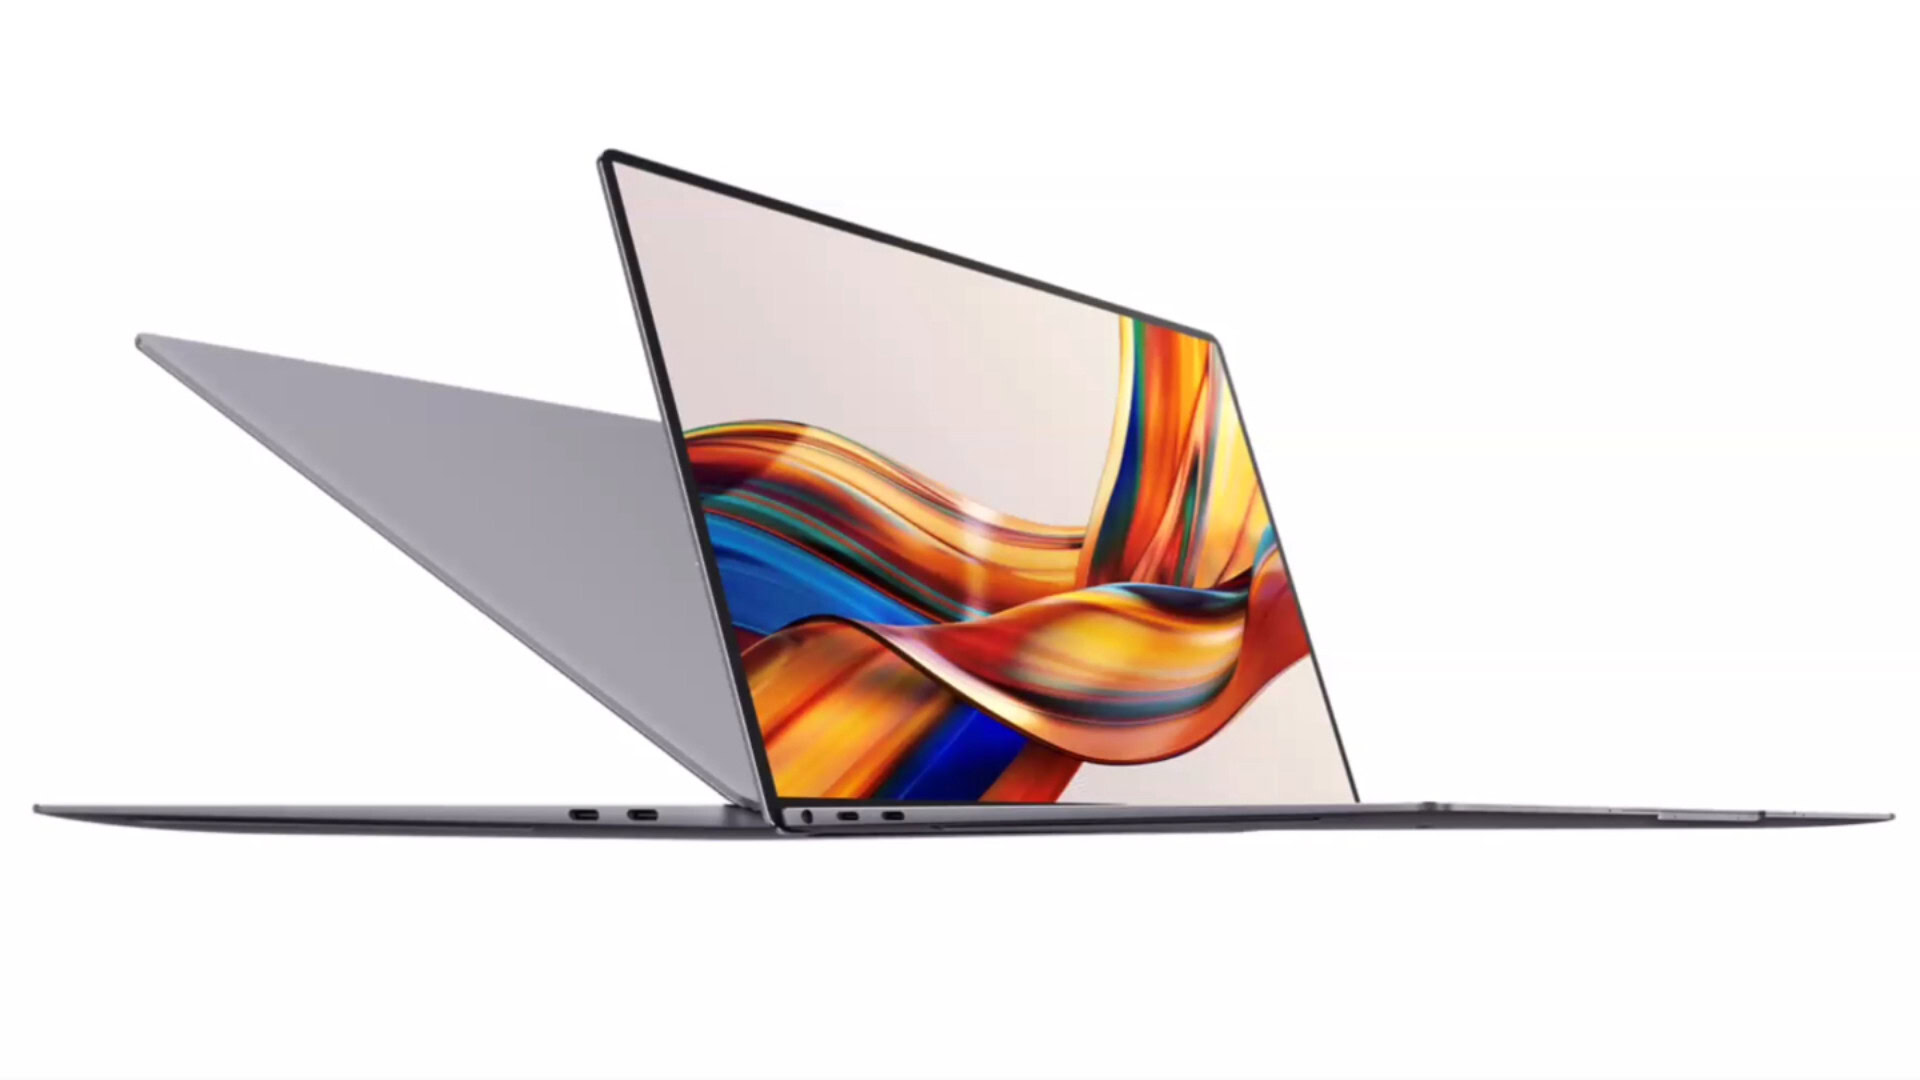 HUAWEI MateBook X Pro (2022) revealed: Specs, release date, more